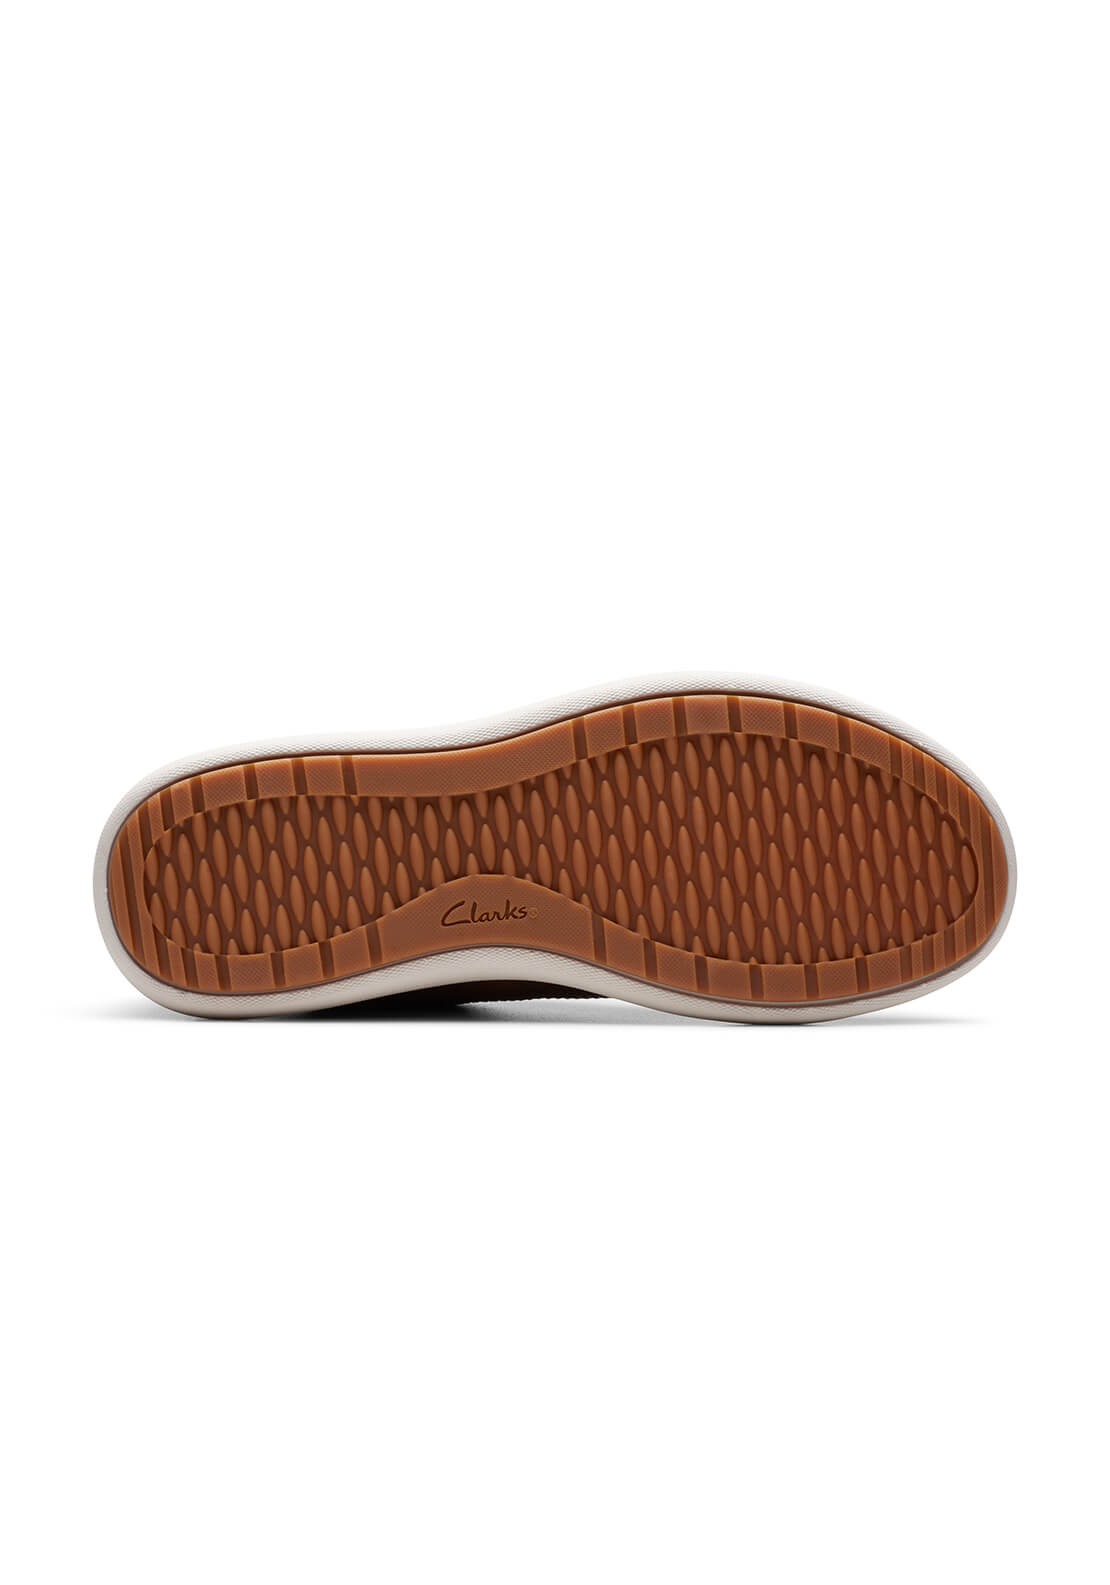 Clarks Nalle Lace Zip Trainer - Rose Gold 7 Shaws Department Stores